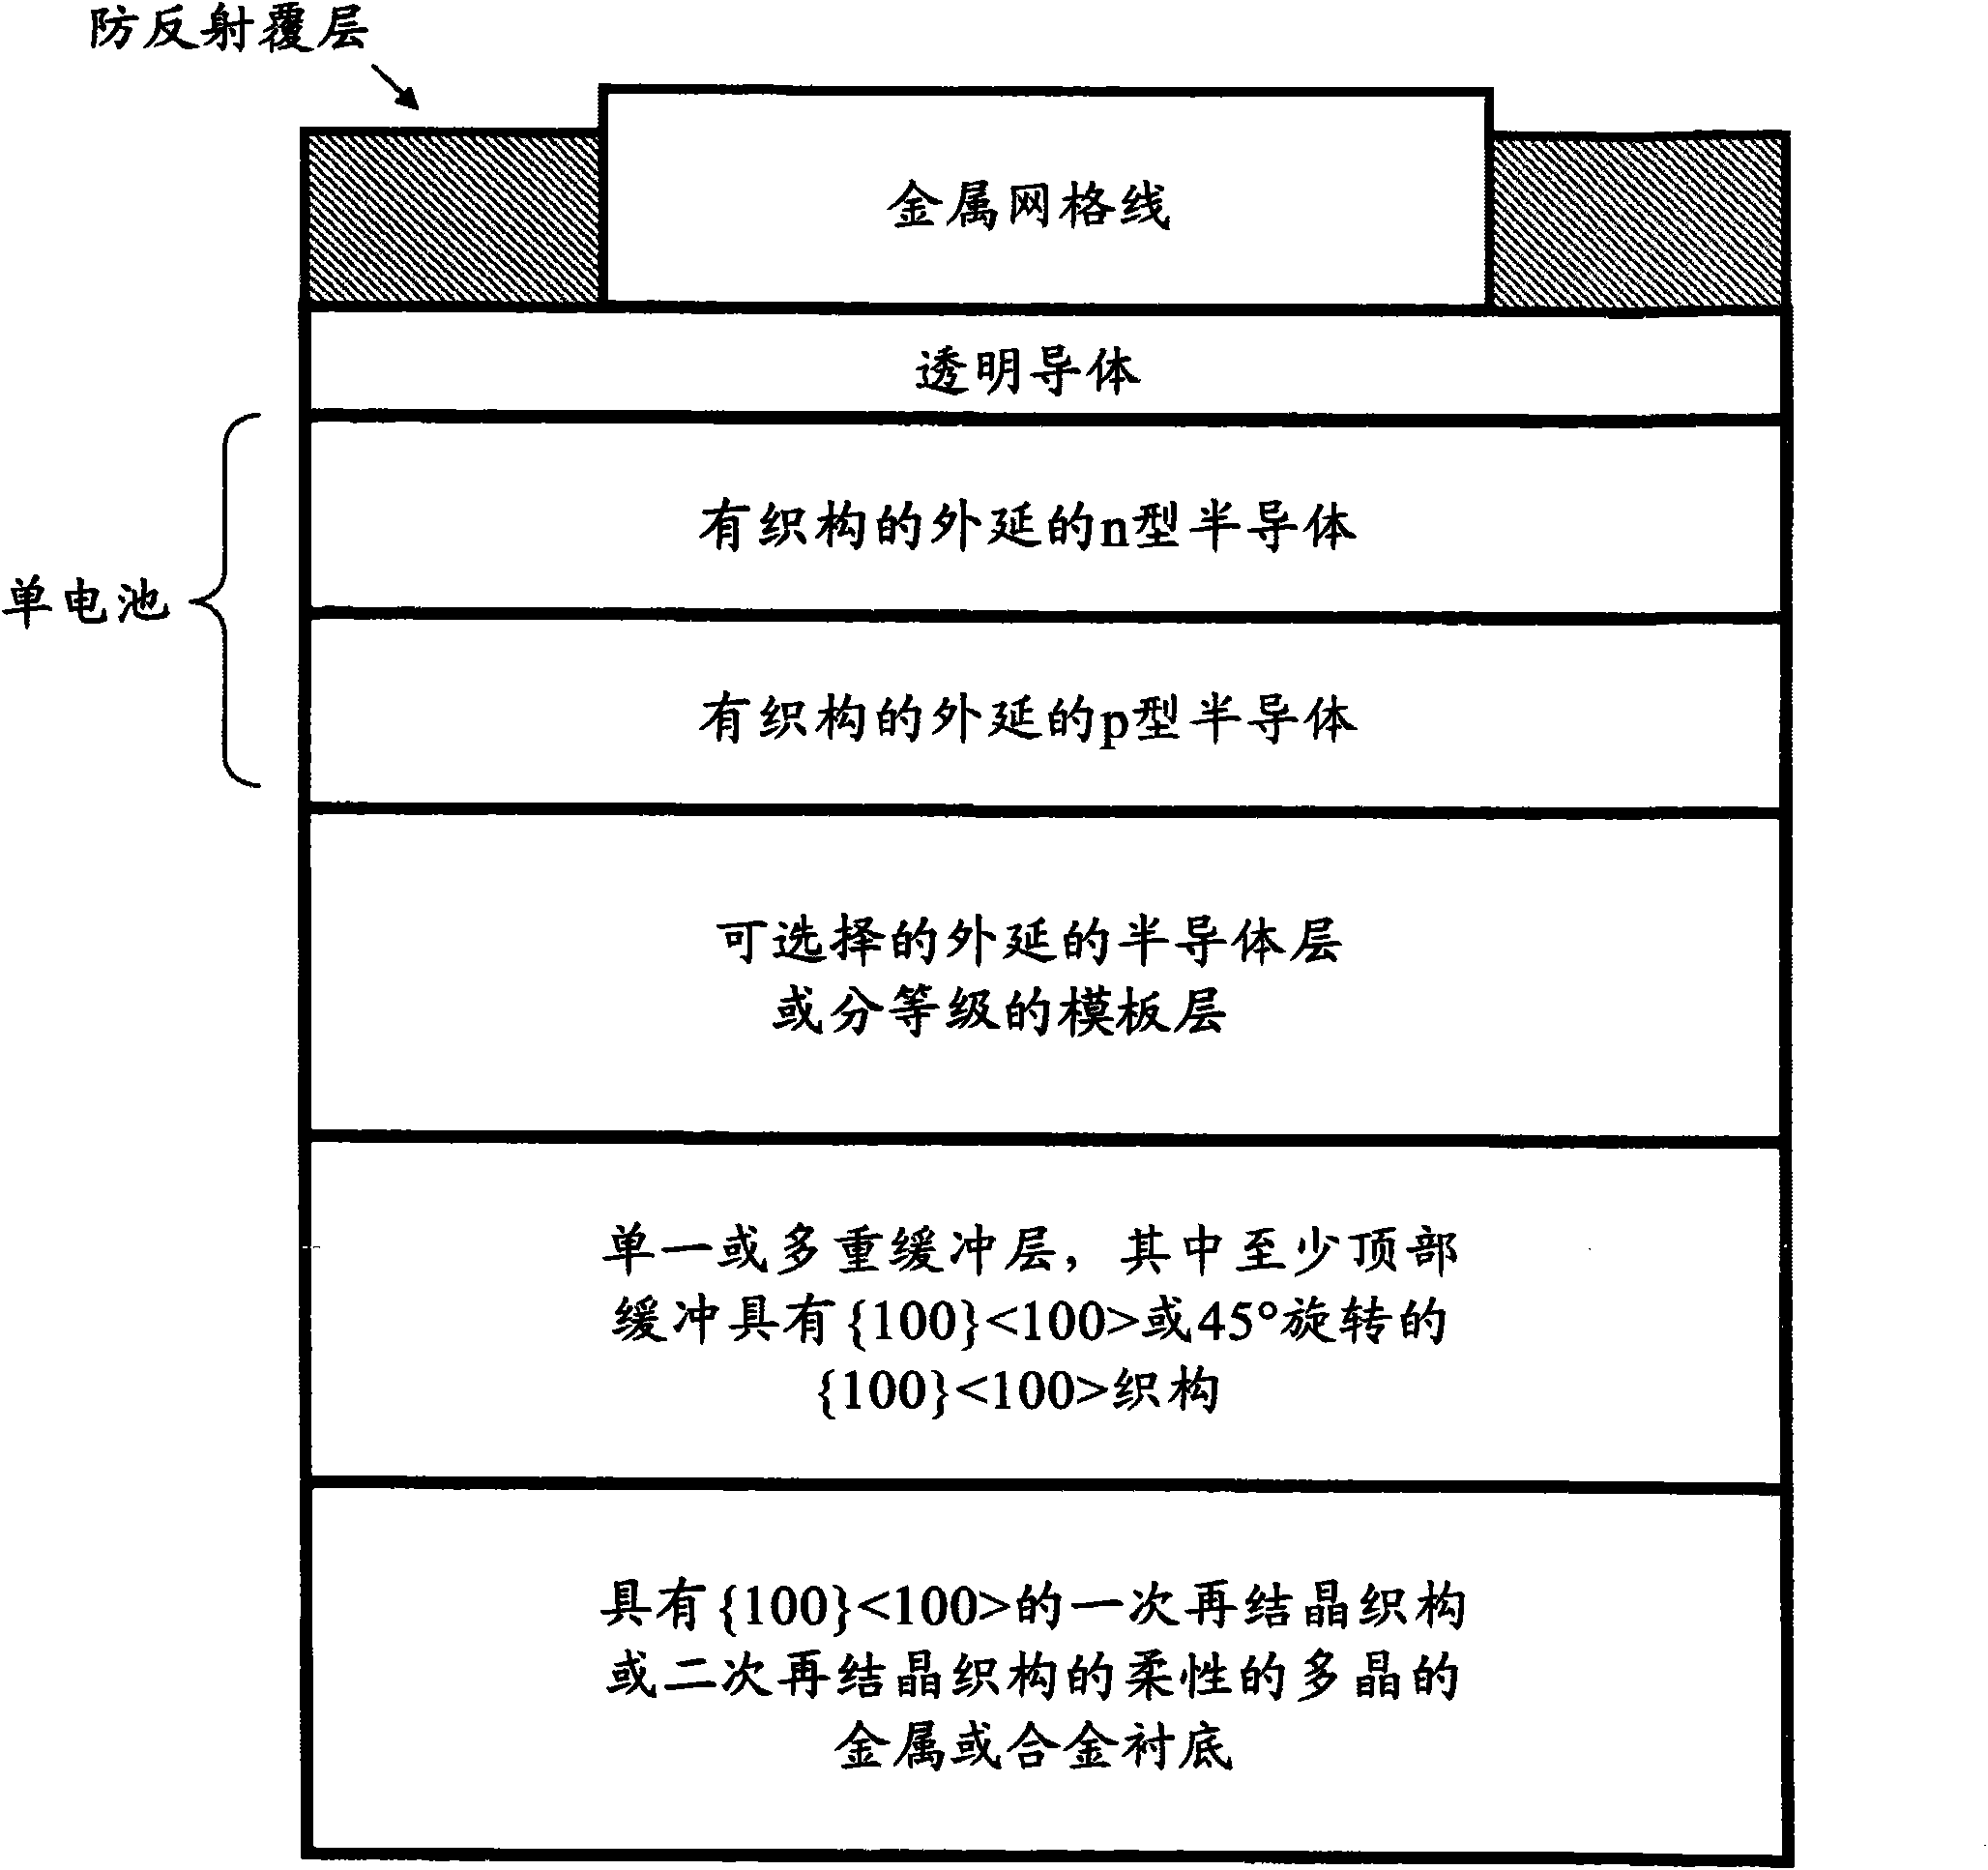 Semiconductor-based large-area flexible electronic devices